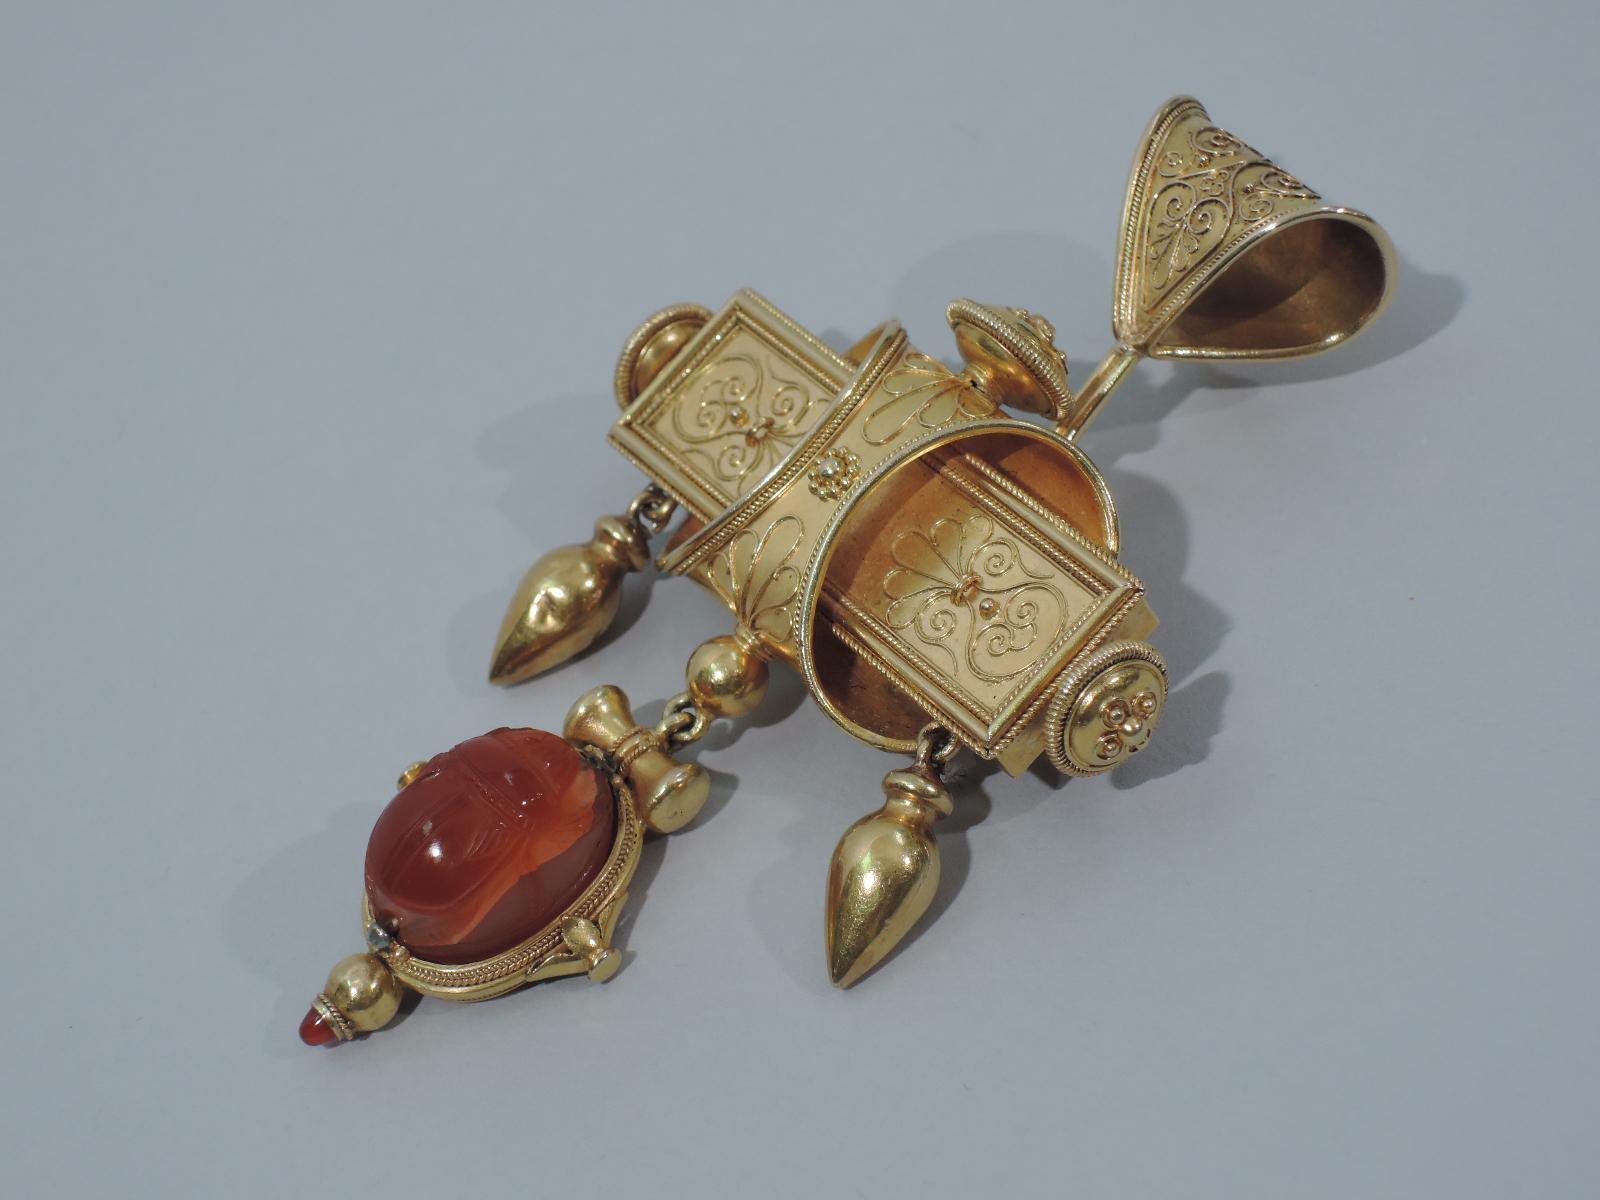 Italian 18K gold pendant with scarab, ca. 1860. Carved cornelian scarab on gold mount with applied filigree and rope ornament. Can be worn as brooch.